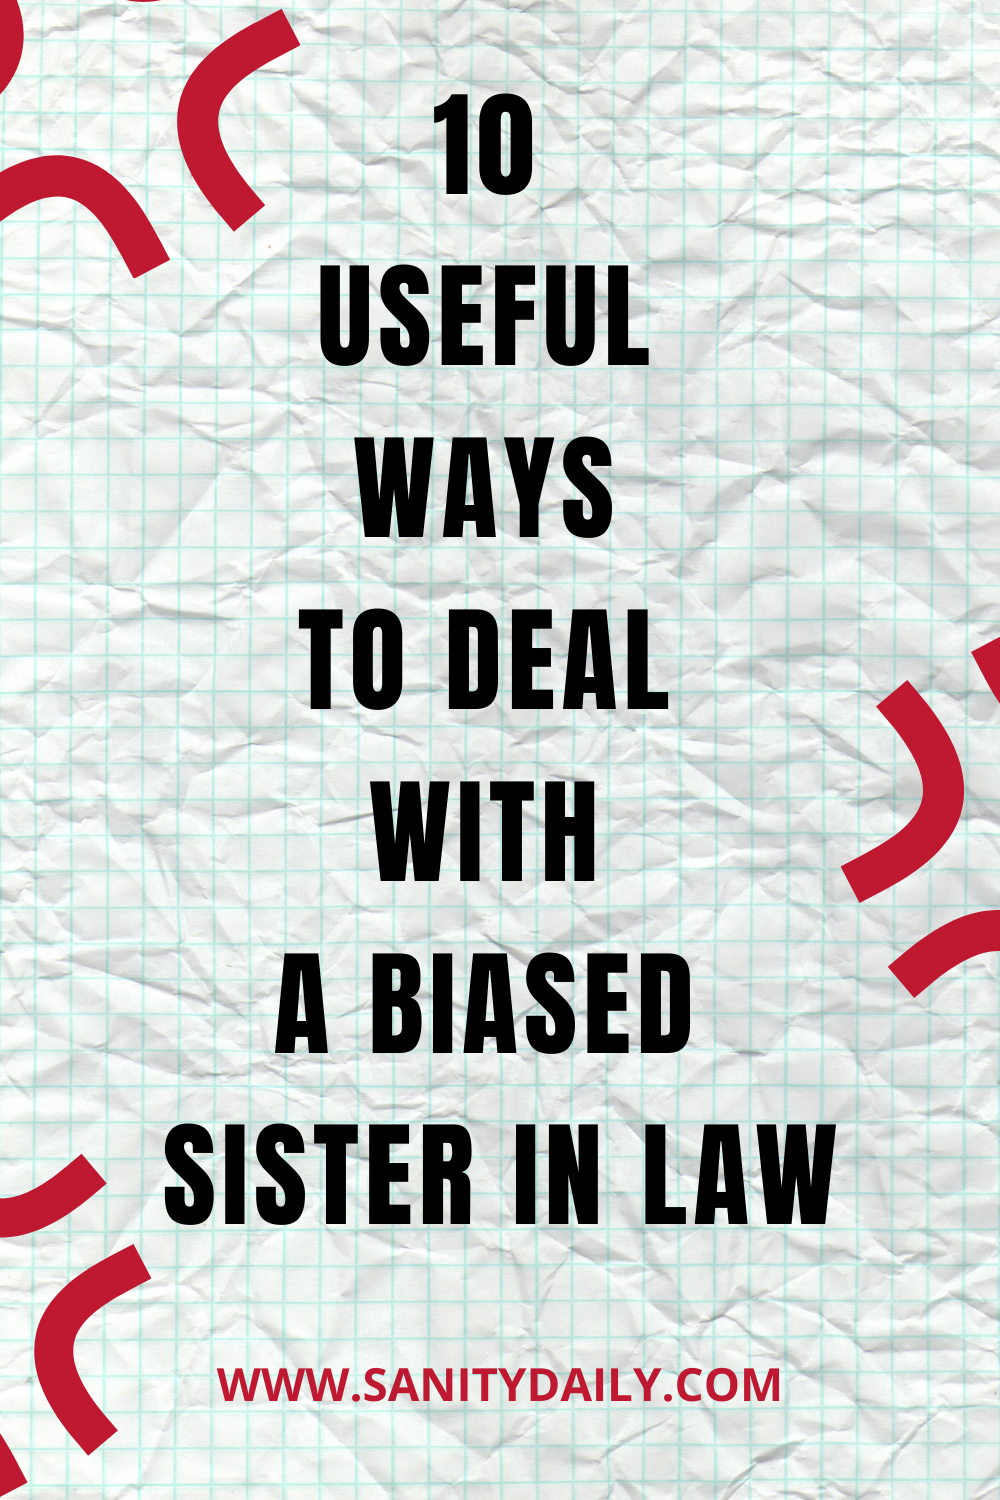 How to deal with a biased sister in law